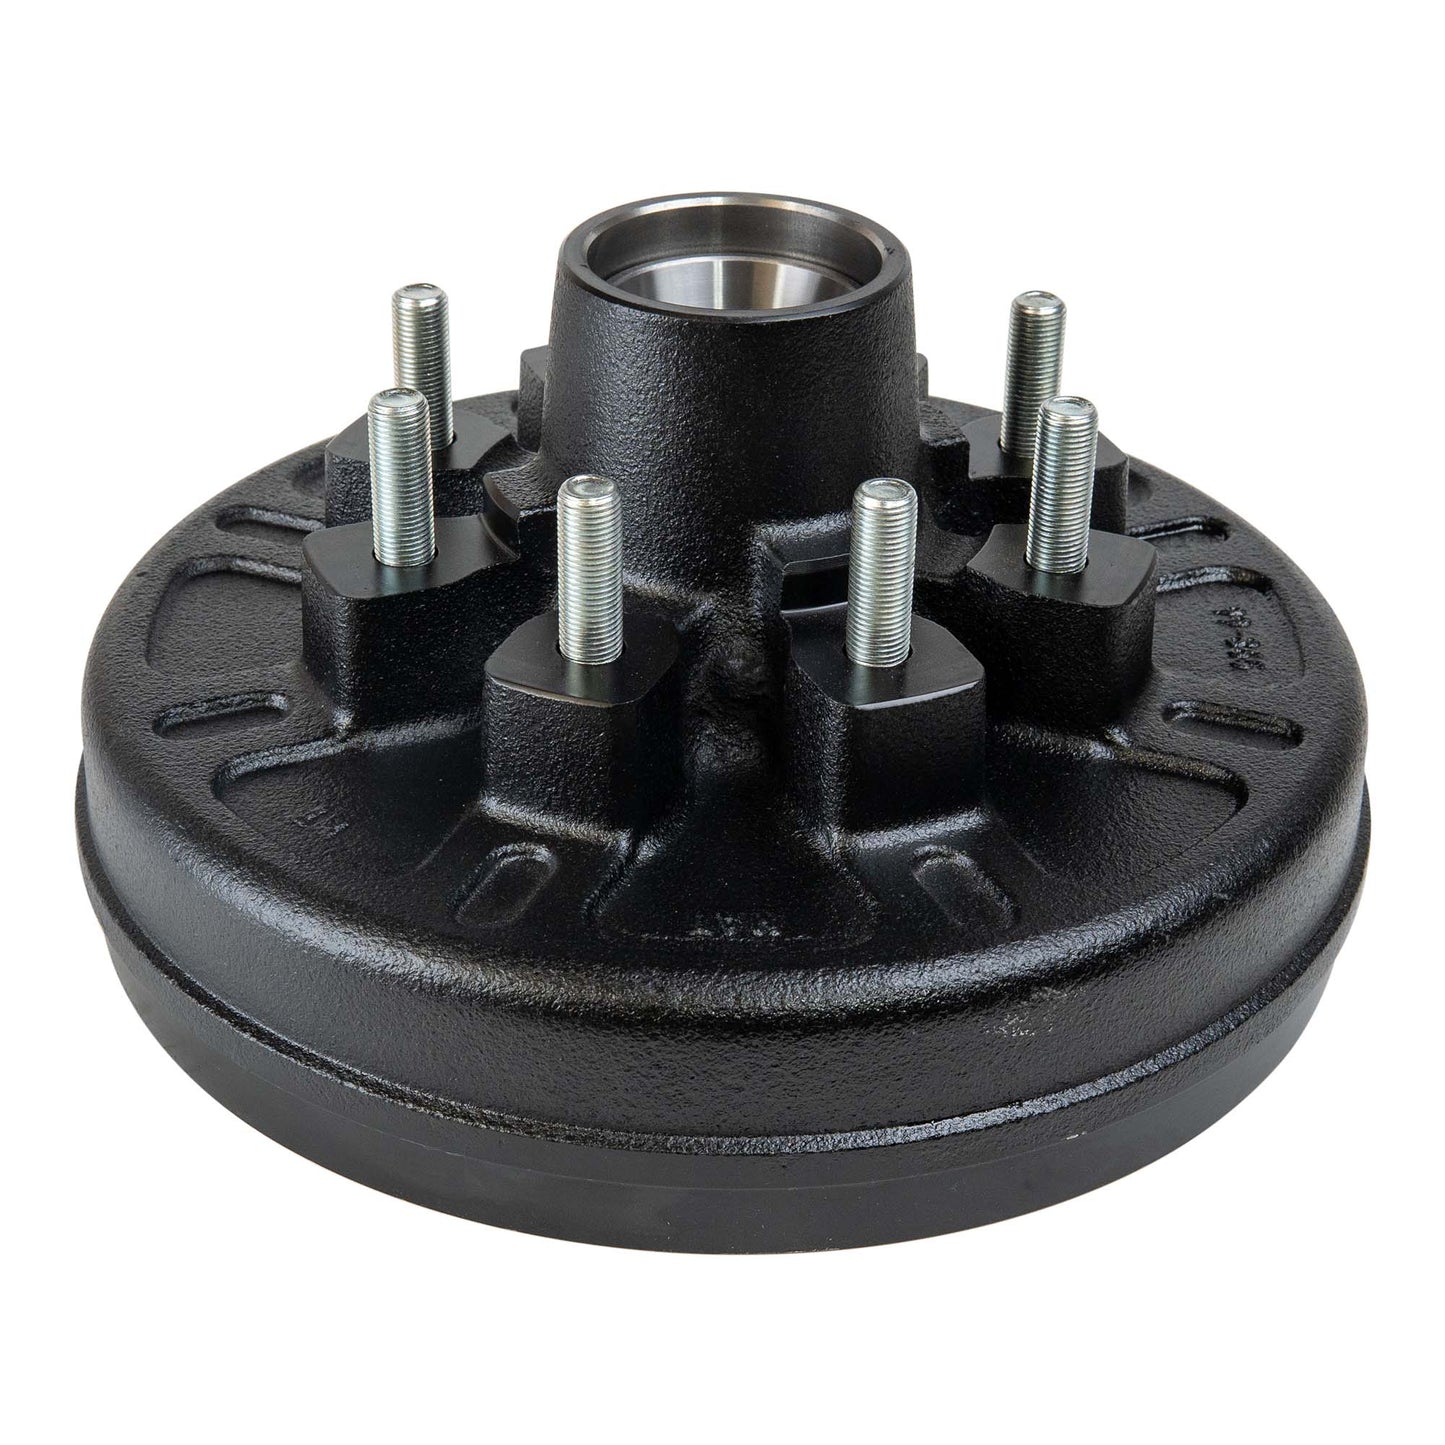 7k Trailer Axle Hub and Drum - 8 lug - The Trailer Parts Outlet